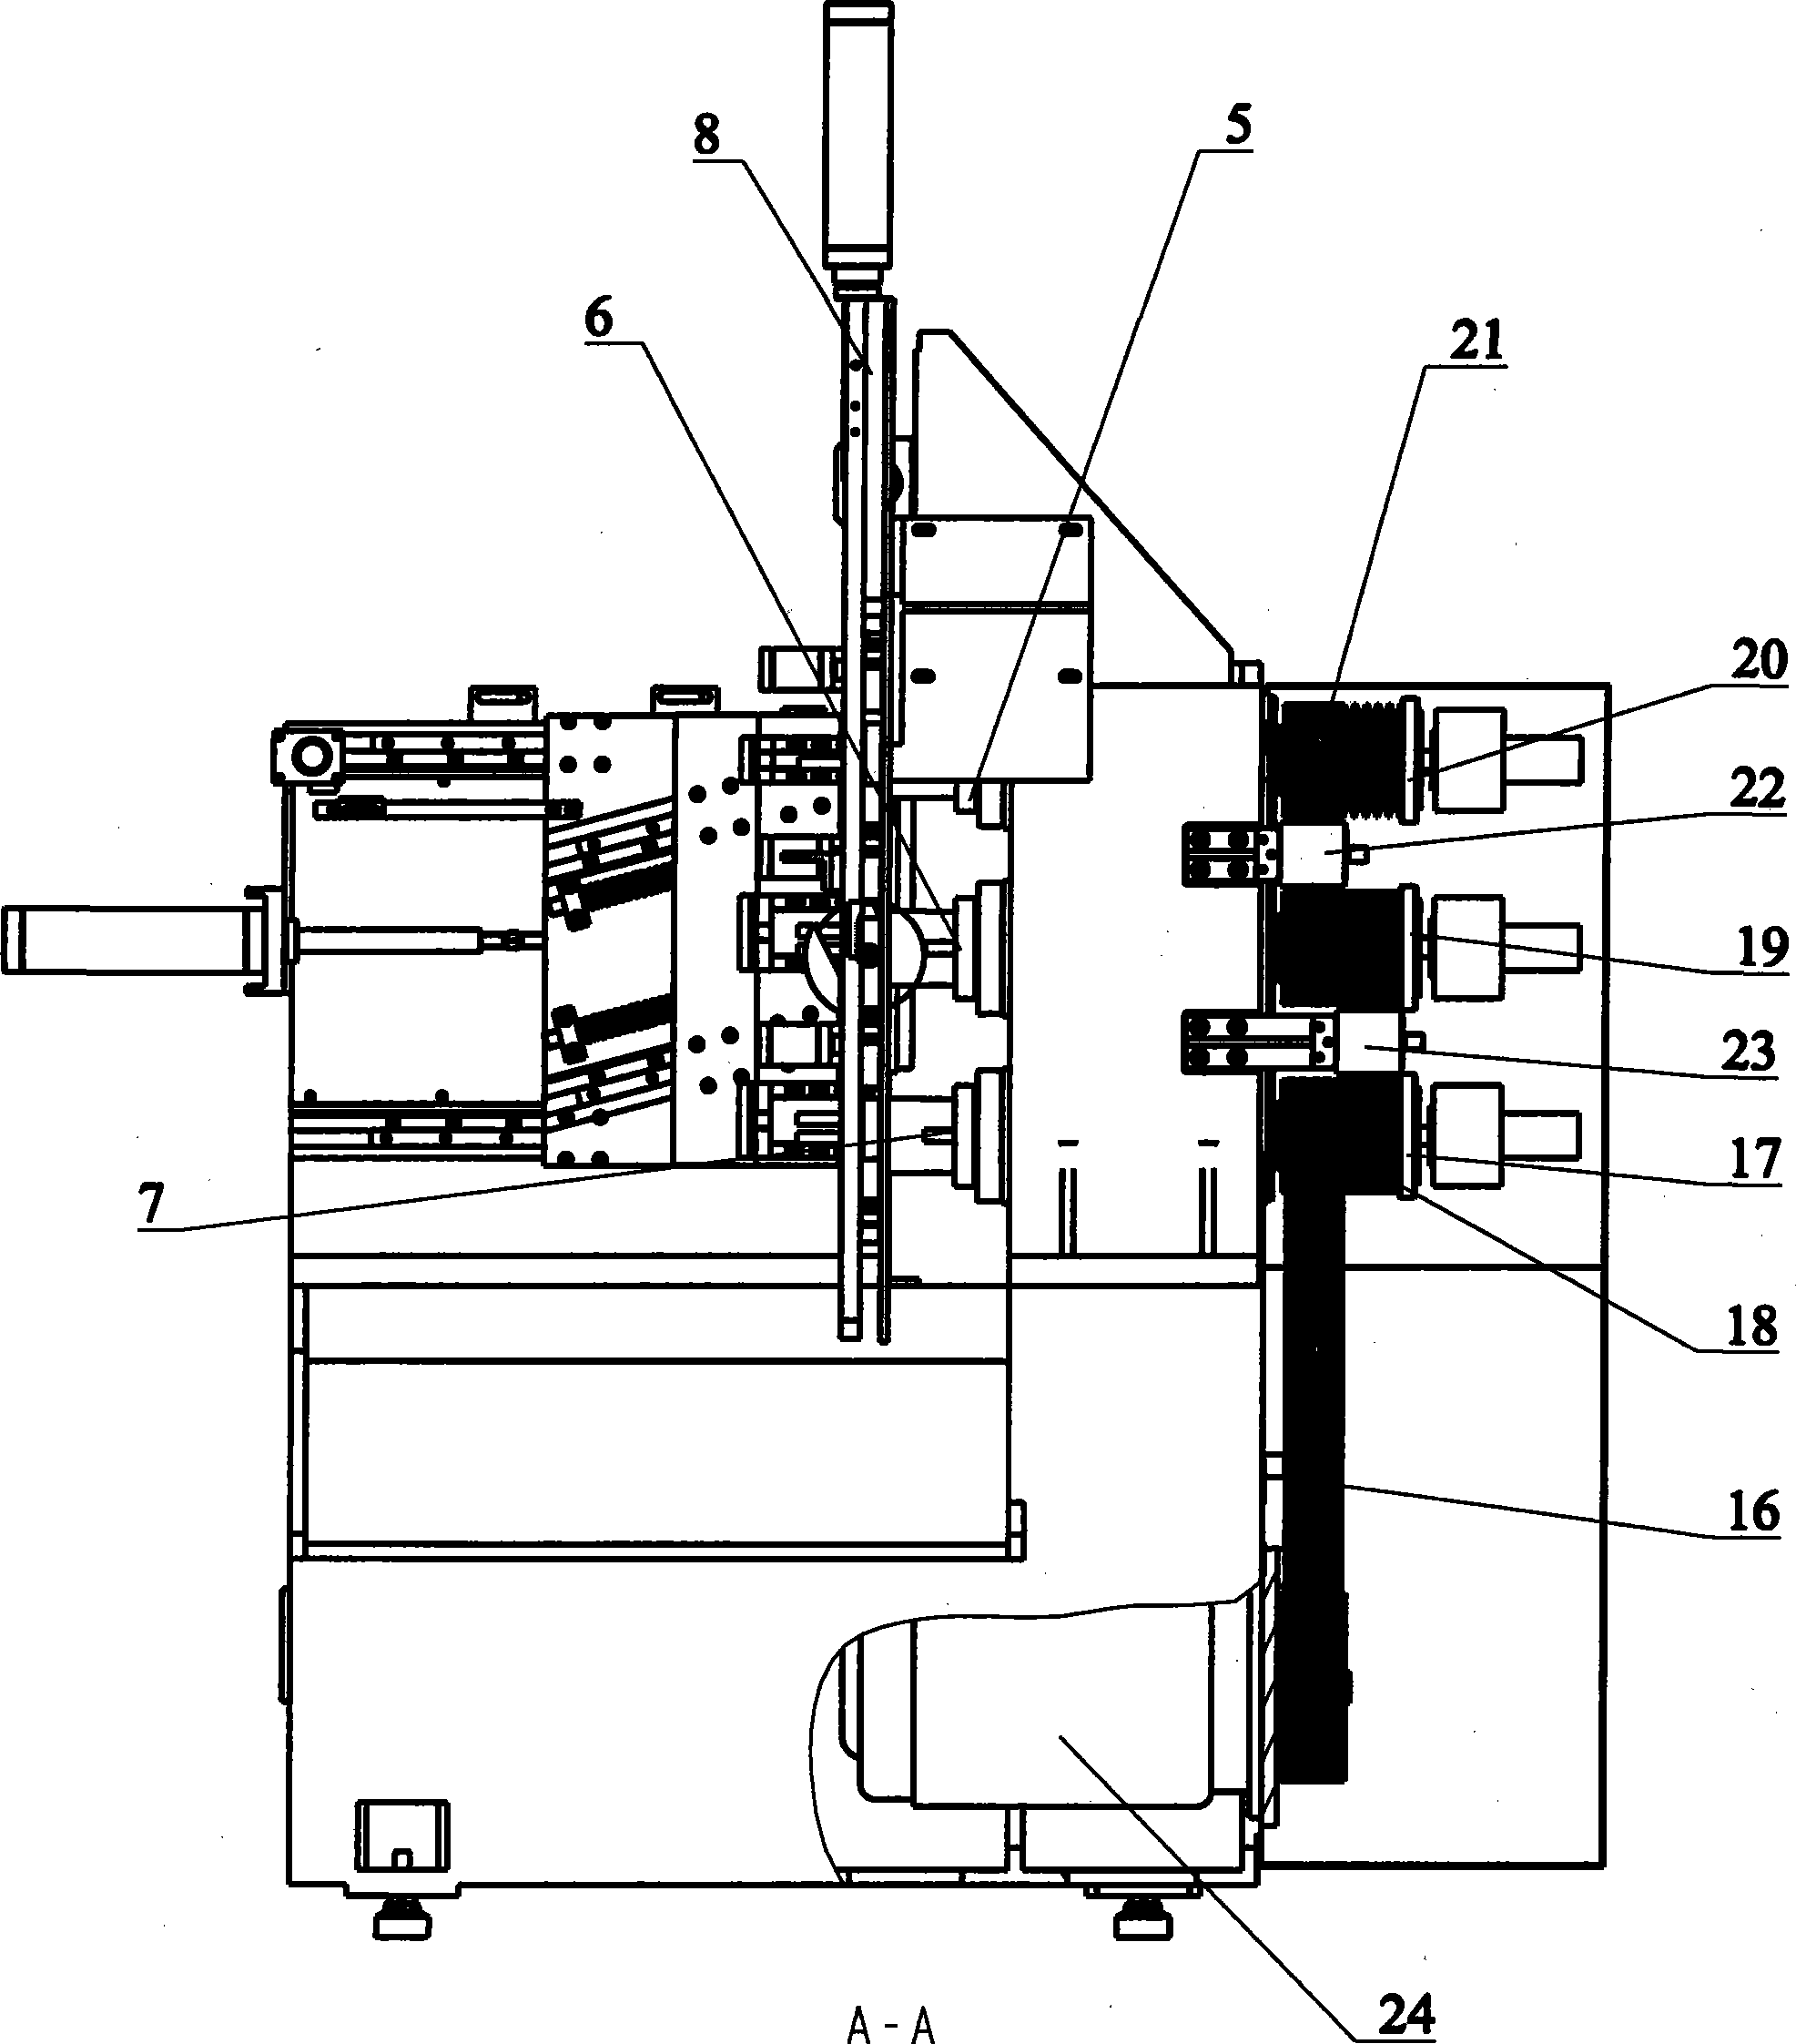 Full-automatic three-primary shaft combined lathe